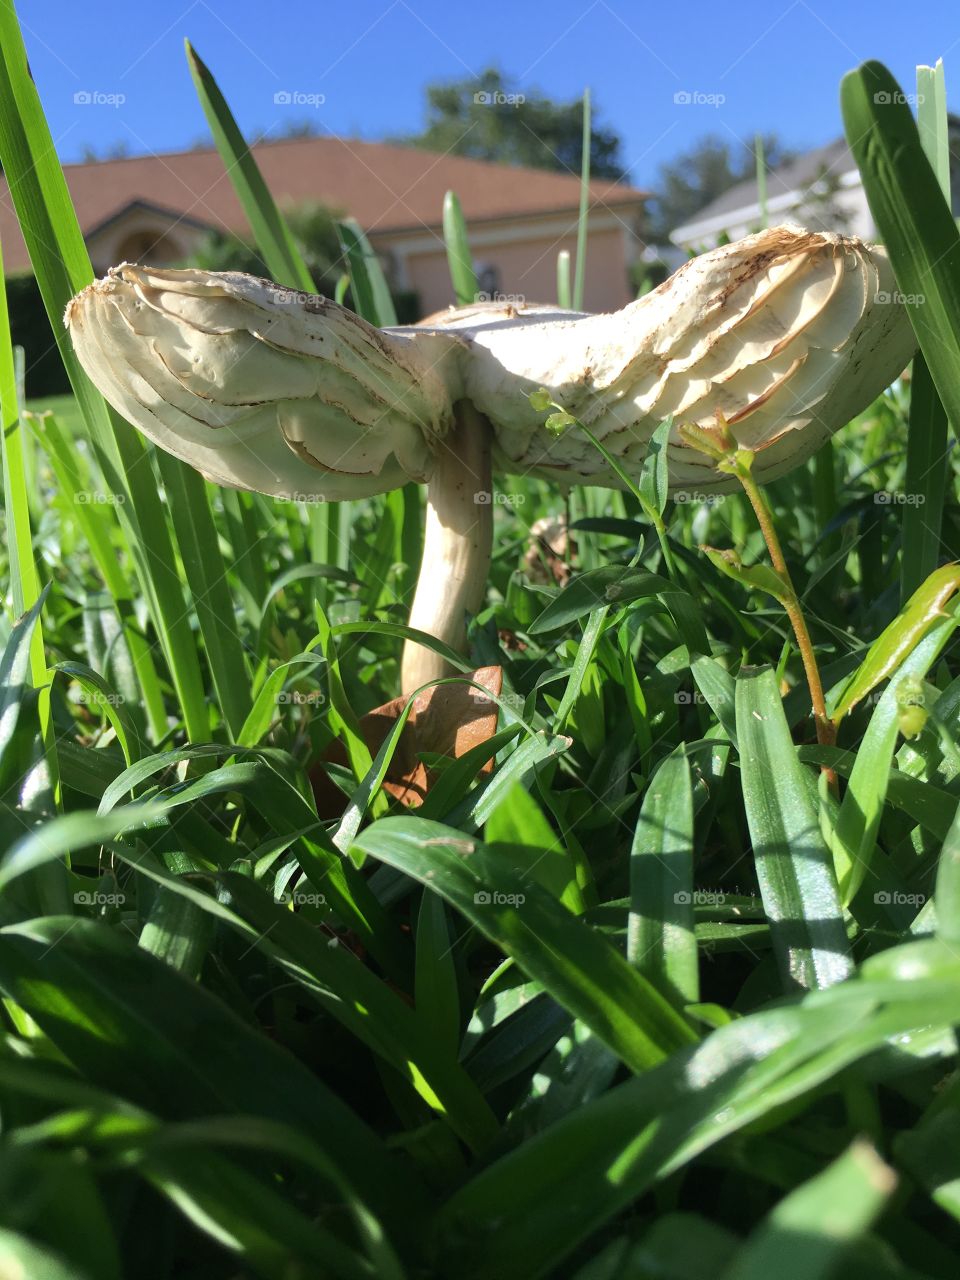 Mushrooms in the green grass in Florida 